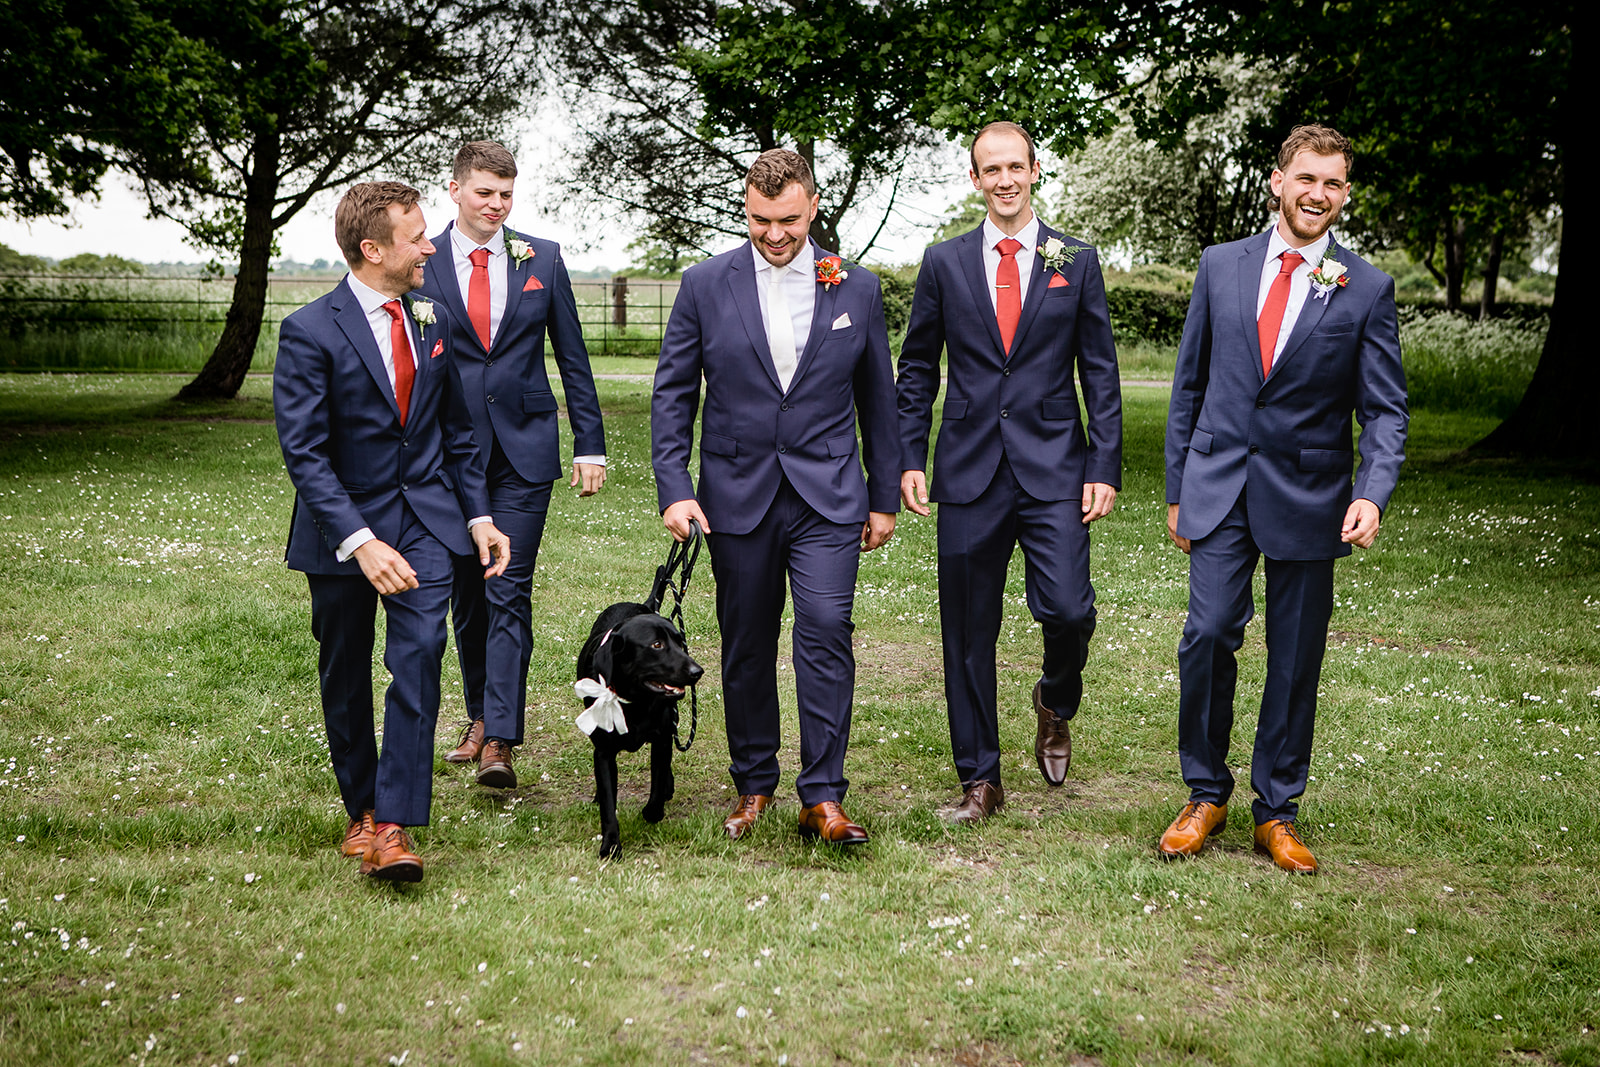 The groom, his dog and and his groomsmen walking